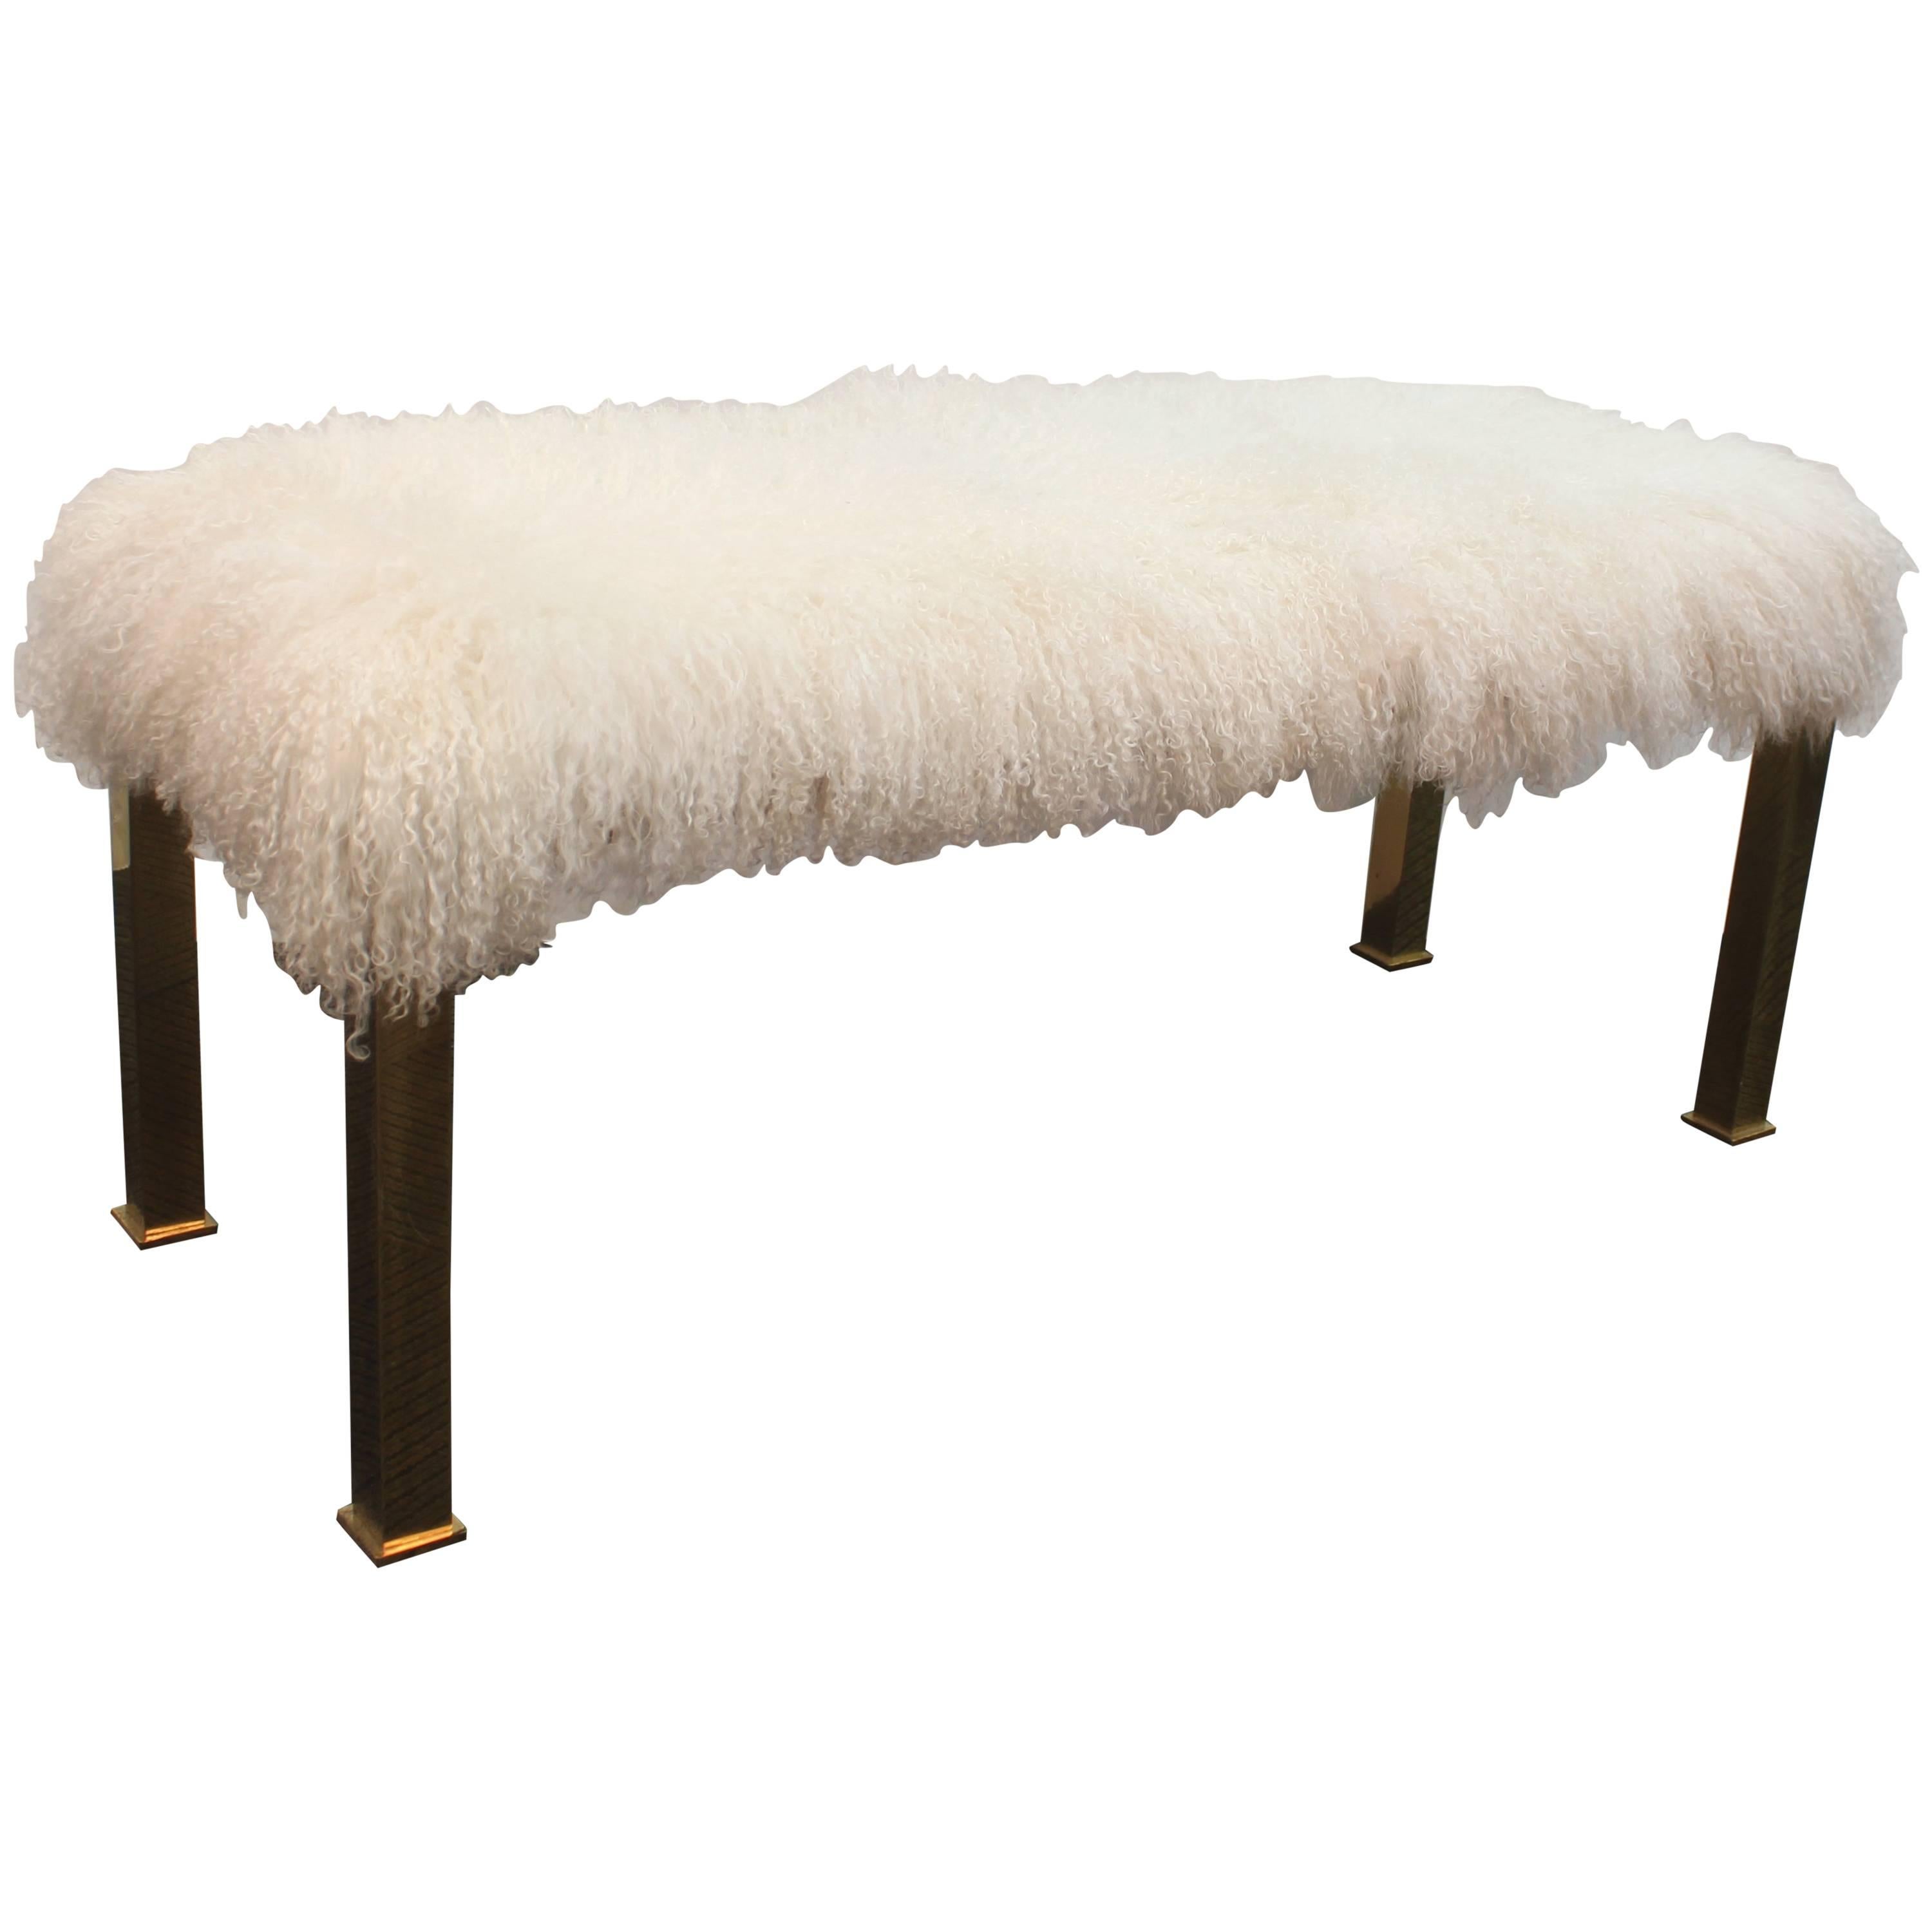 Hollywood Regency Parsons Style Bench in White Curly Lambs Wool and Brass Legs